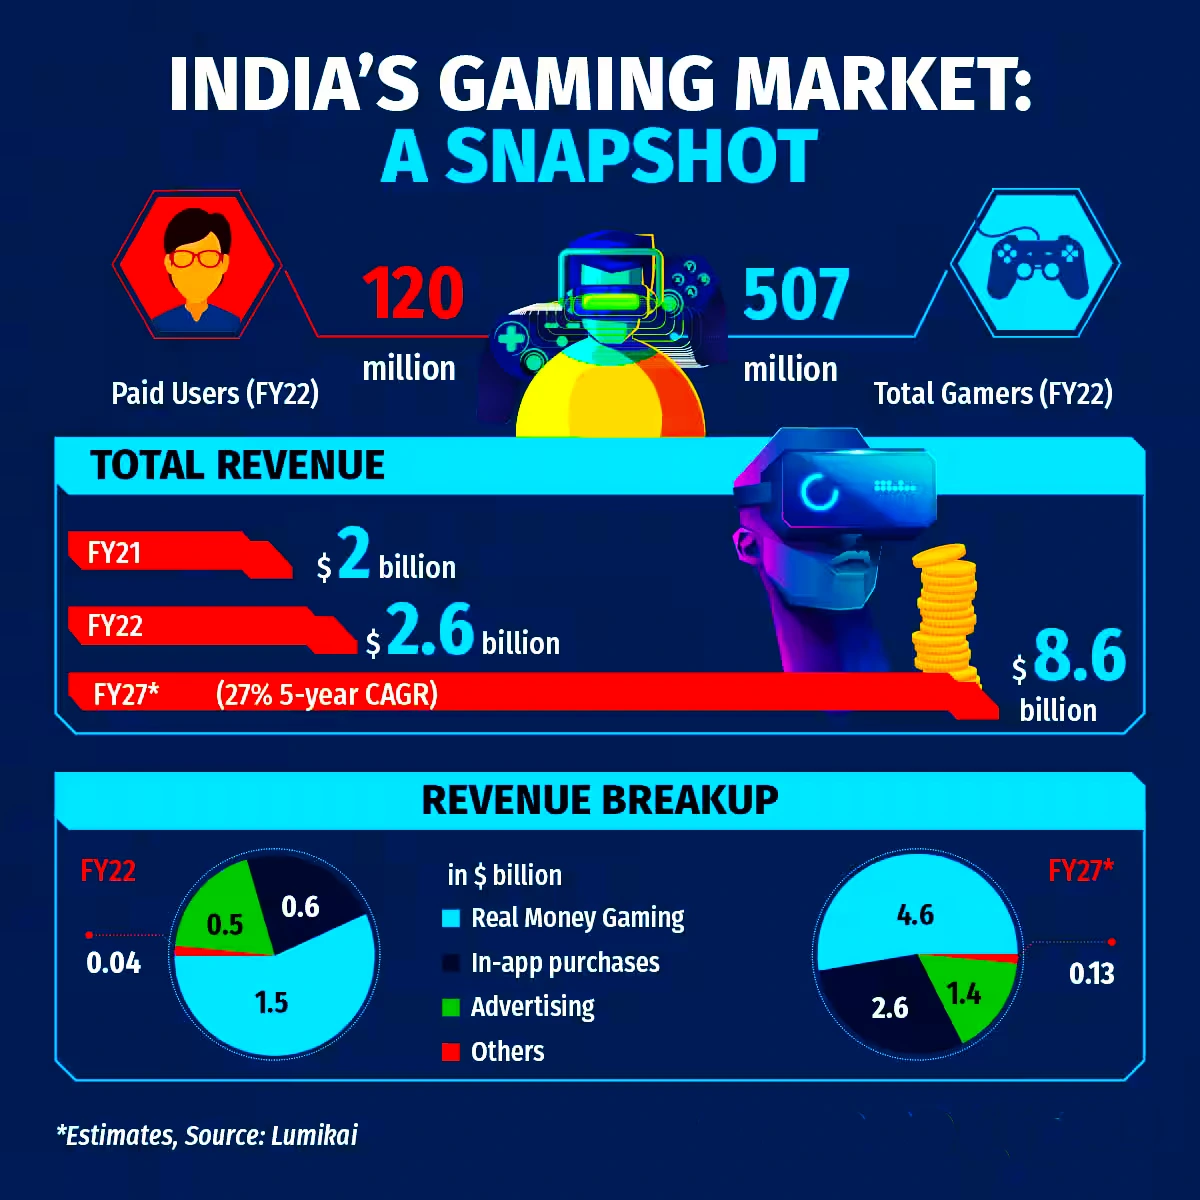 Online Gaming Industry in India